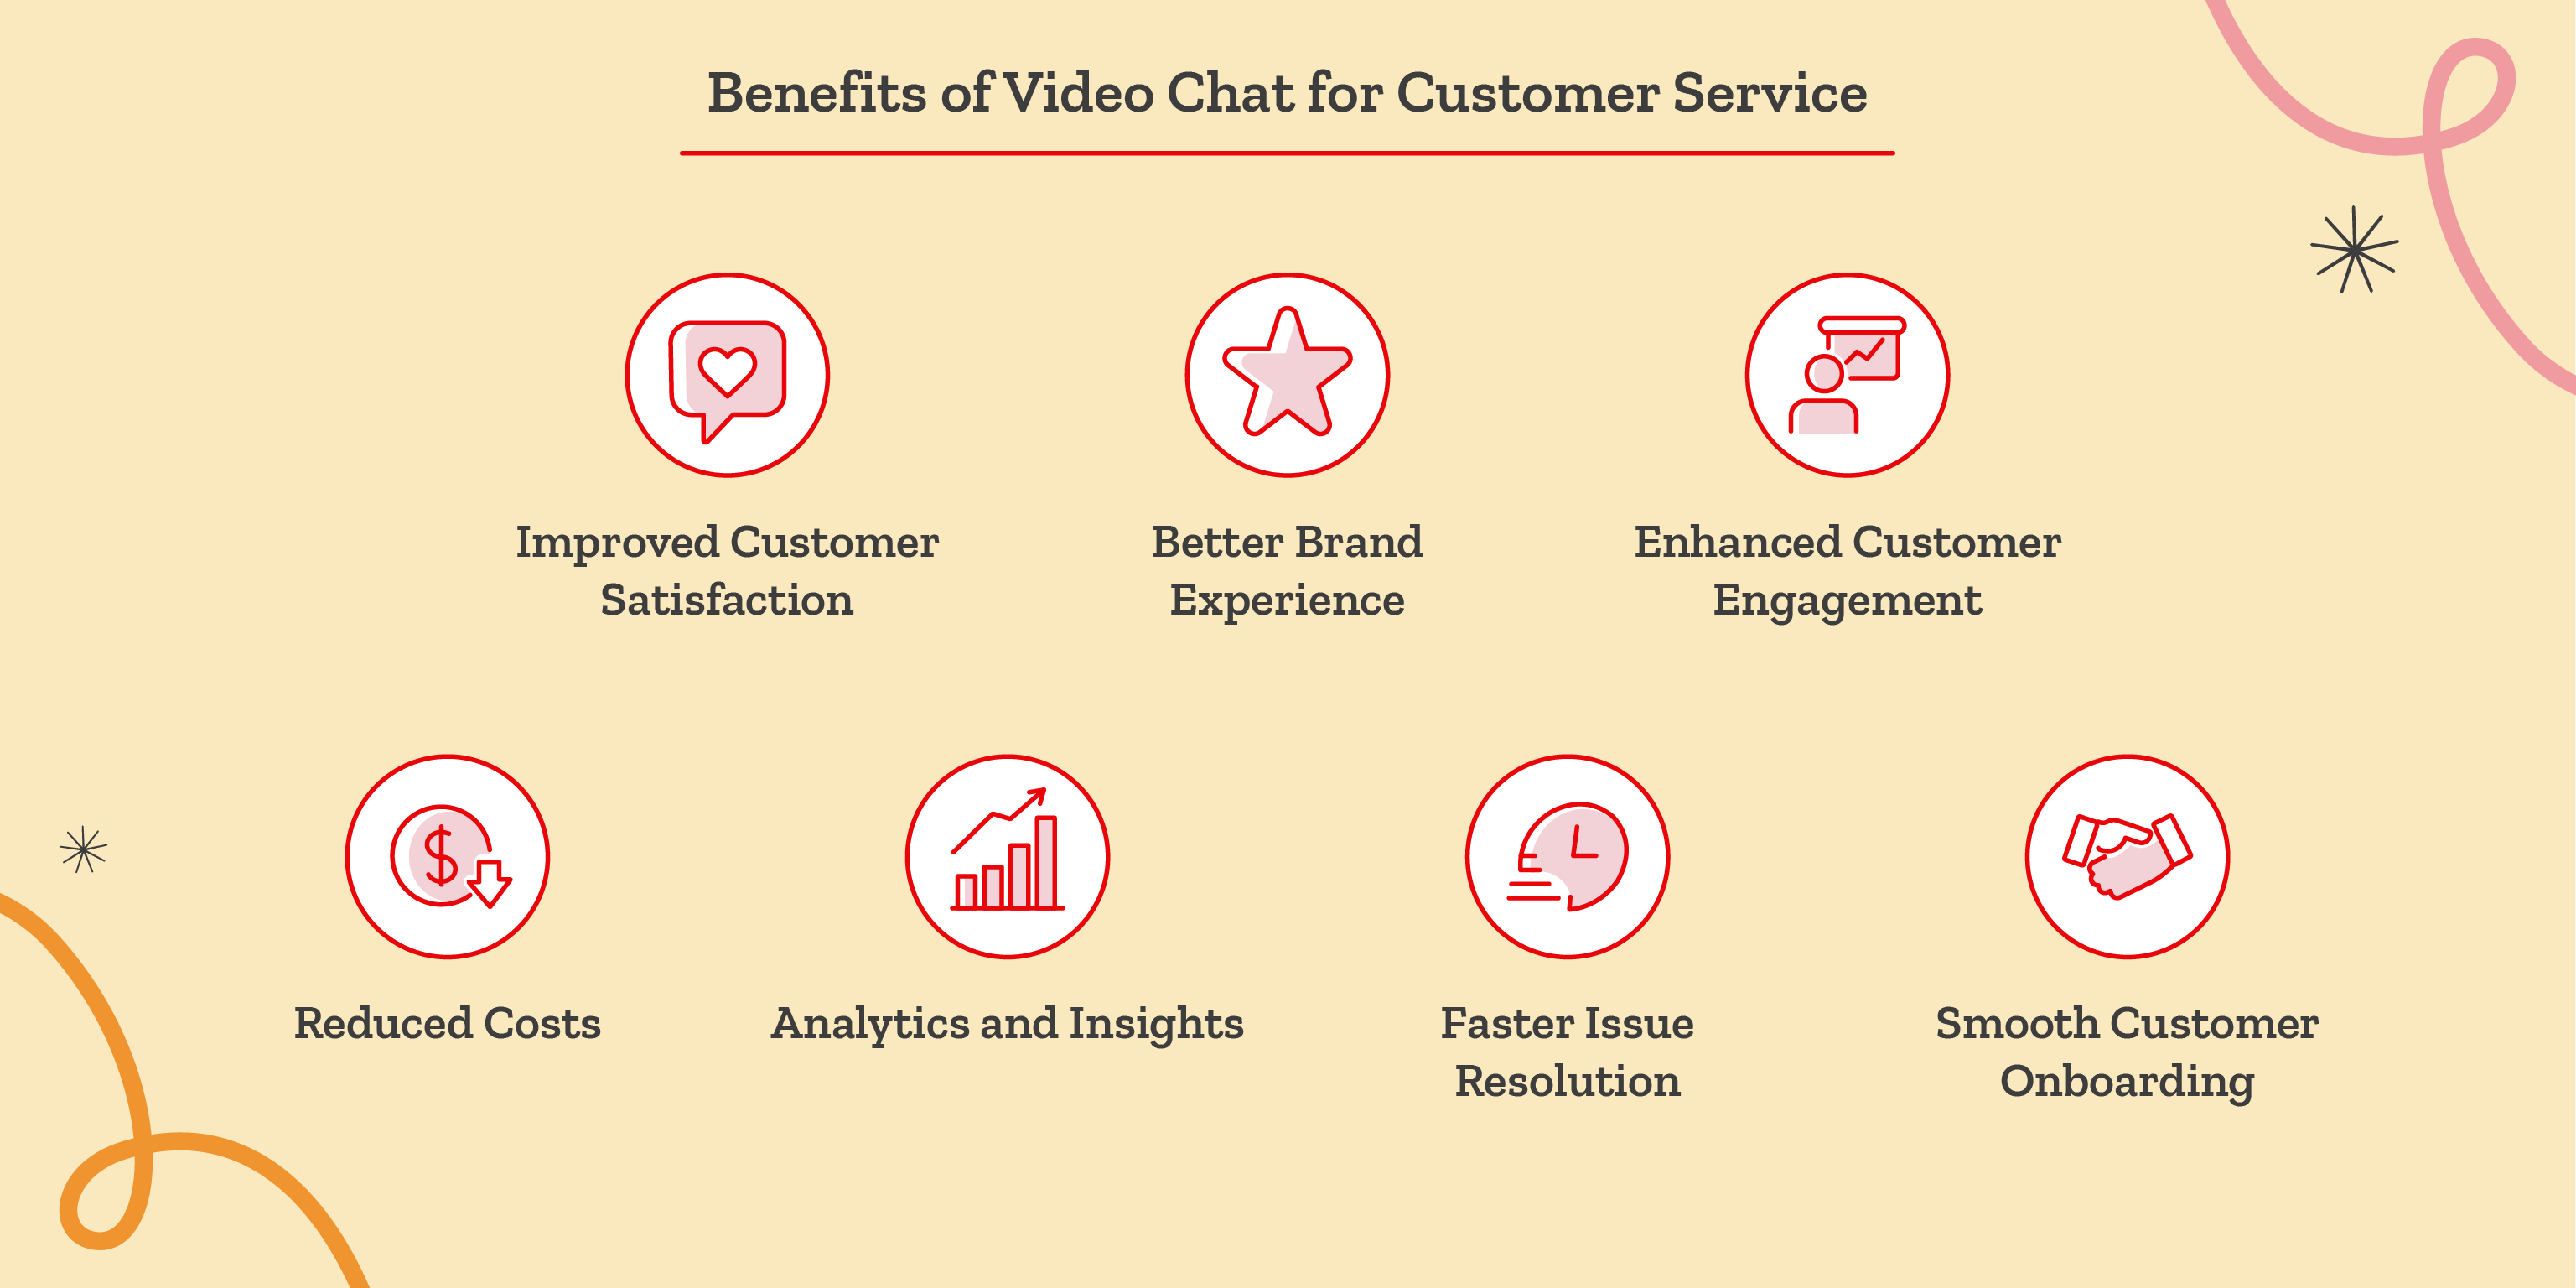 Video chat customer service benefits